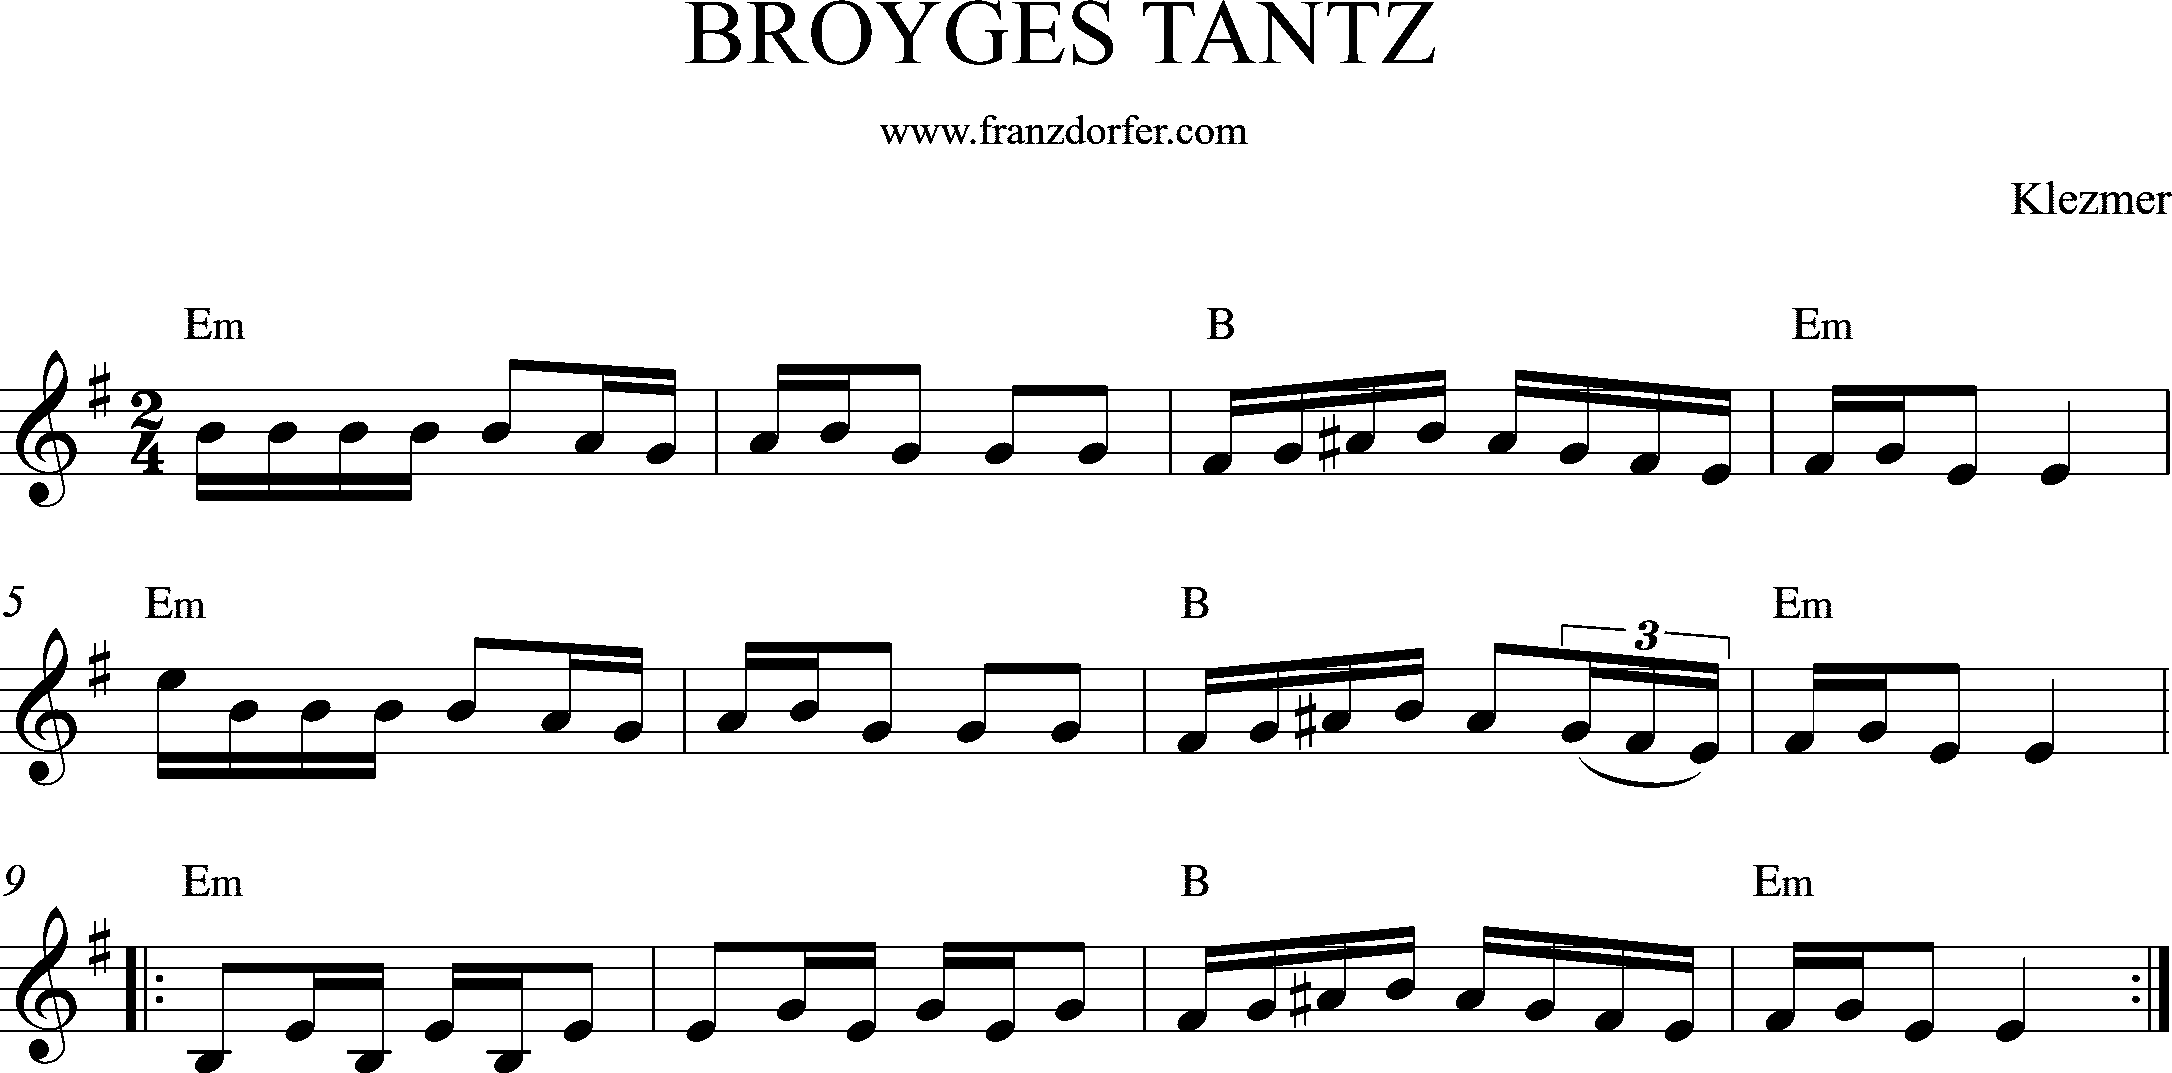 broyges tanz